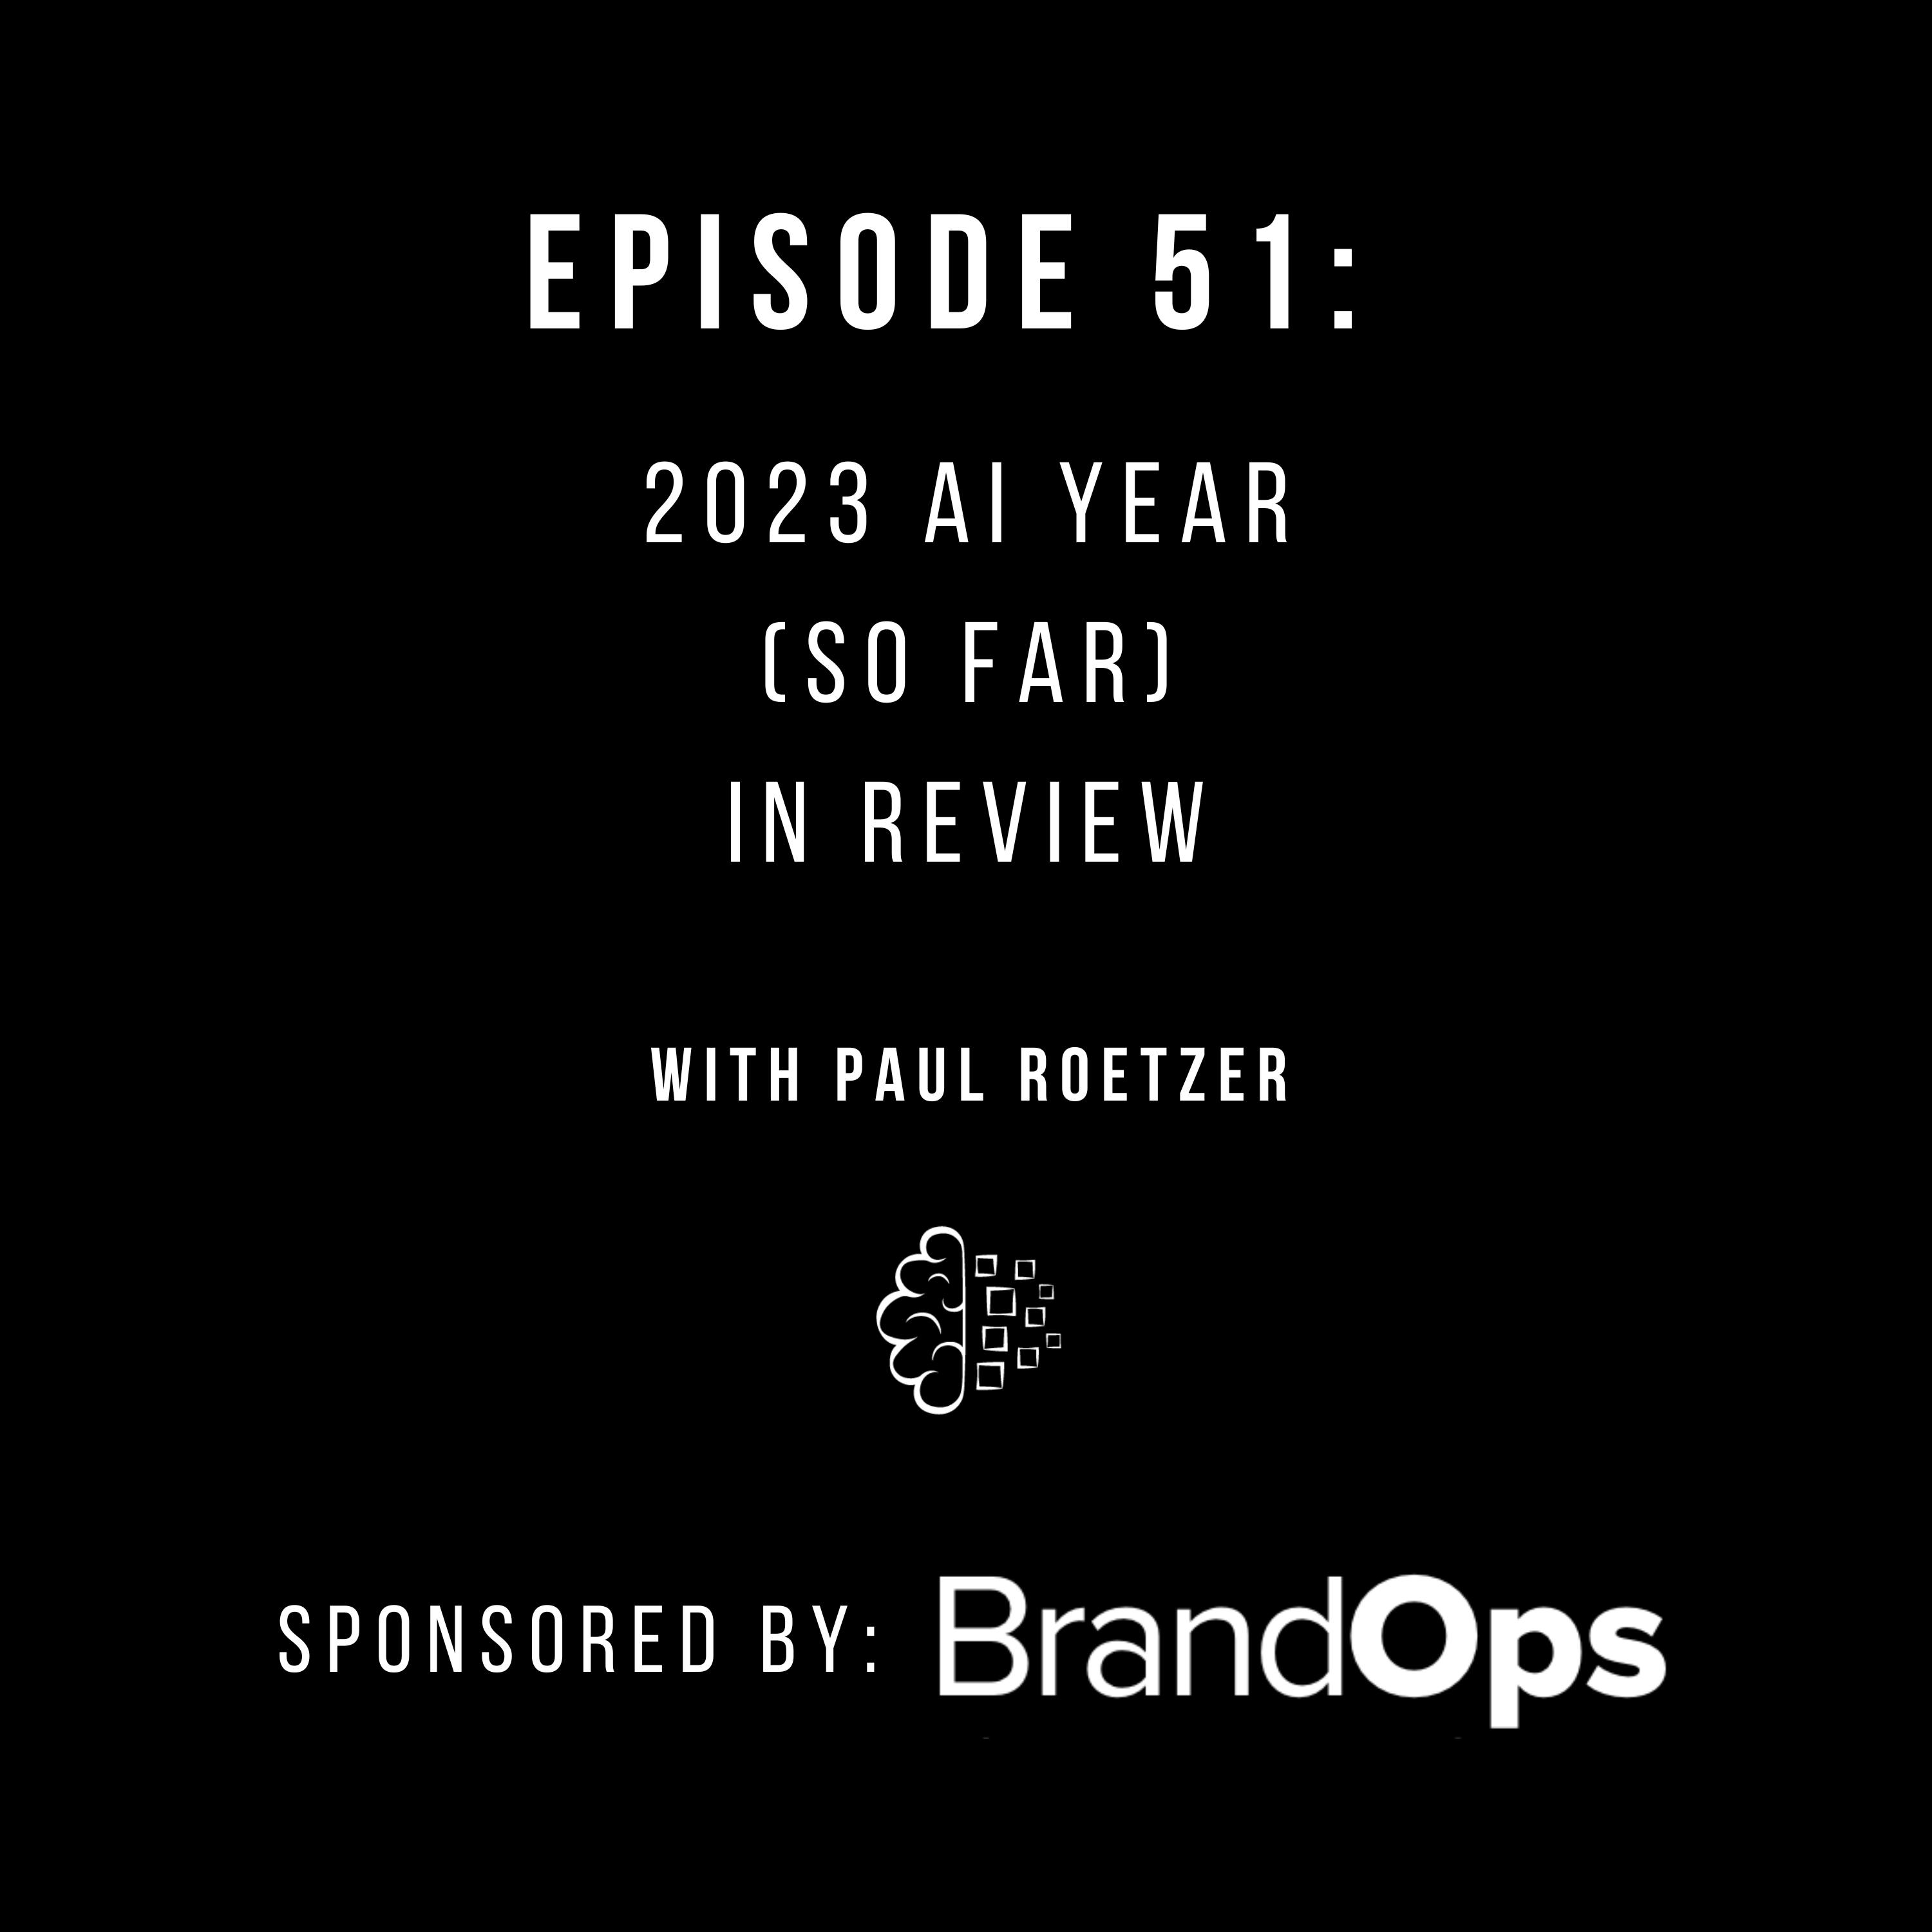 #51: 2023 AI Year (So Far) in Review